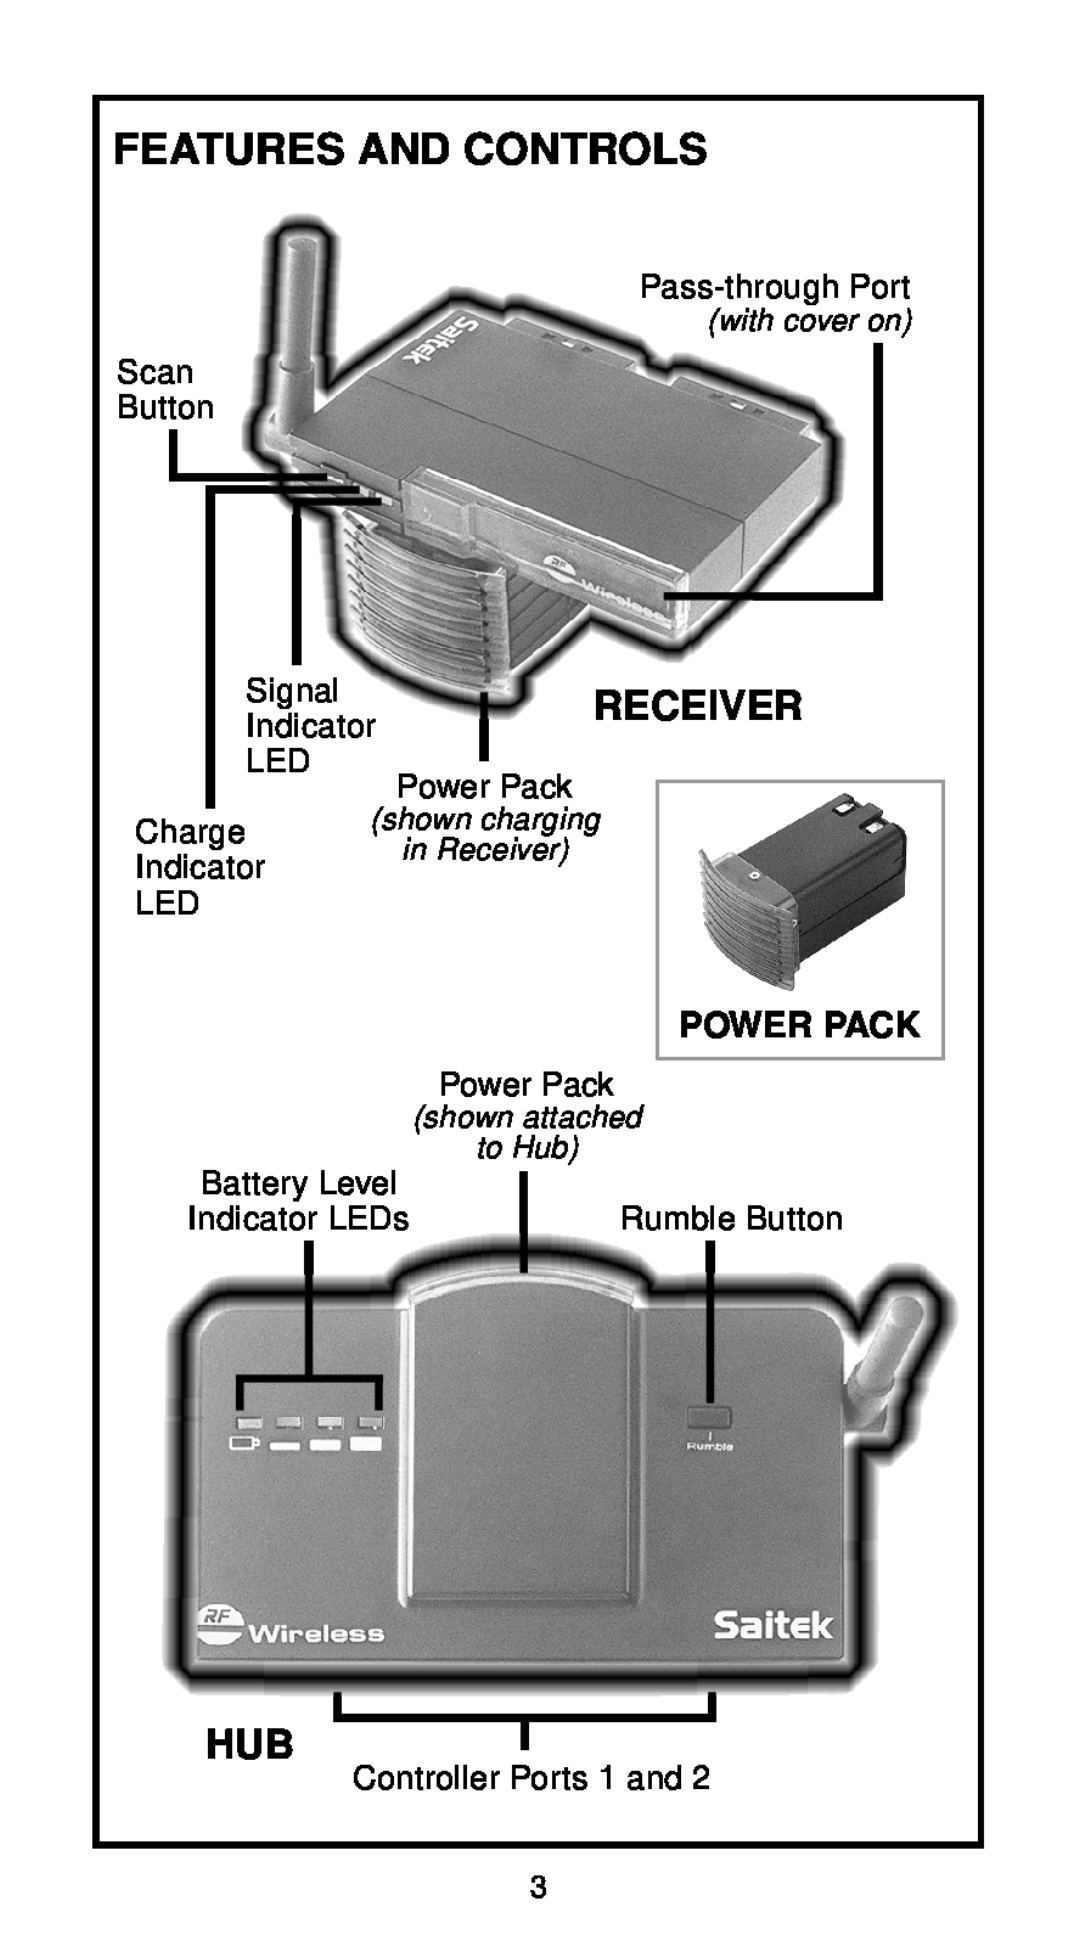 Saitek Wireless Adapter user manual Features And Controls, Receiver, Power Pack 